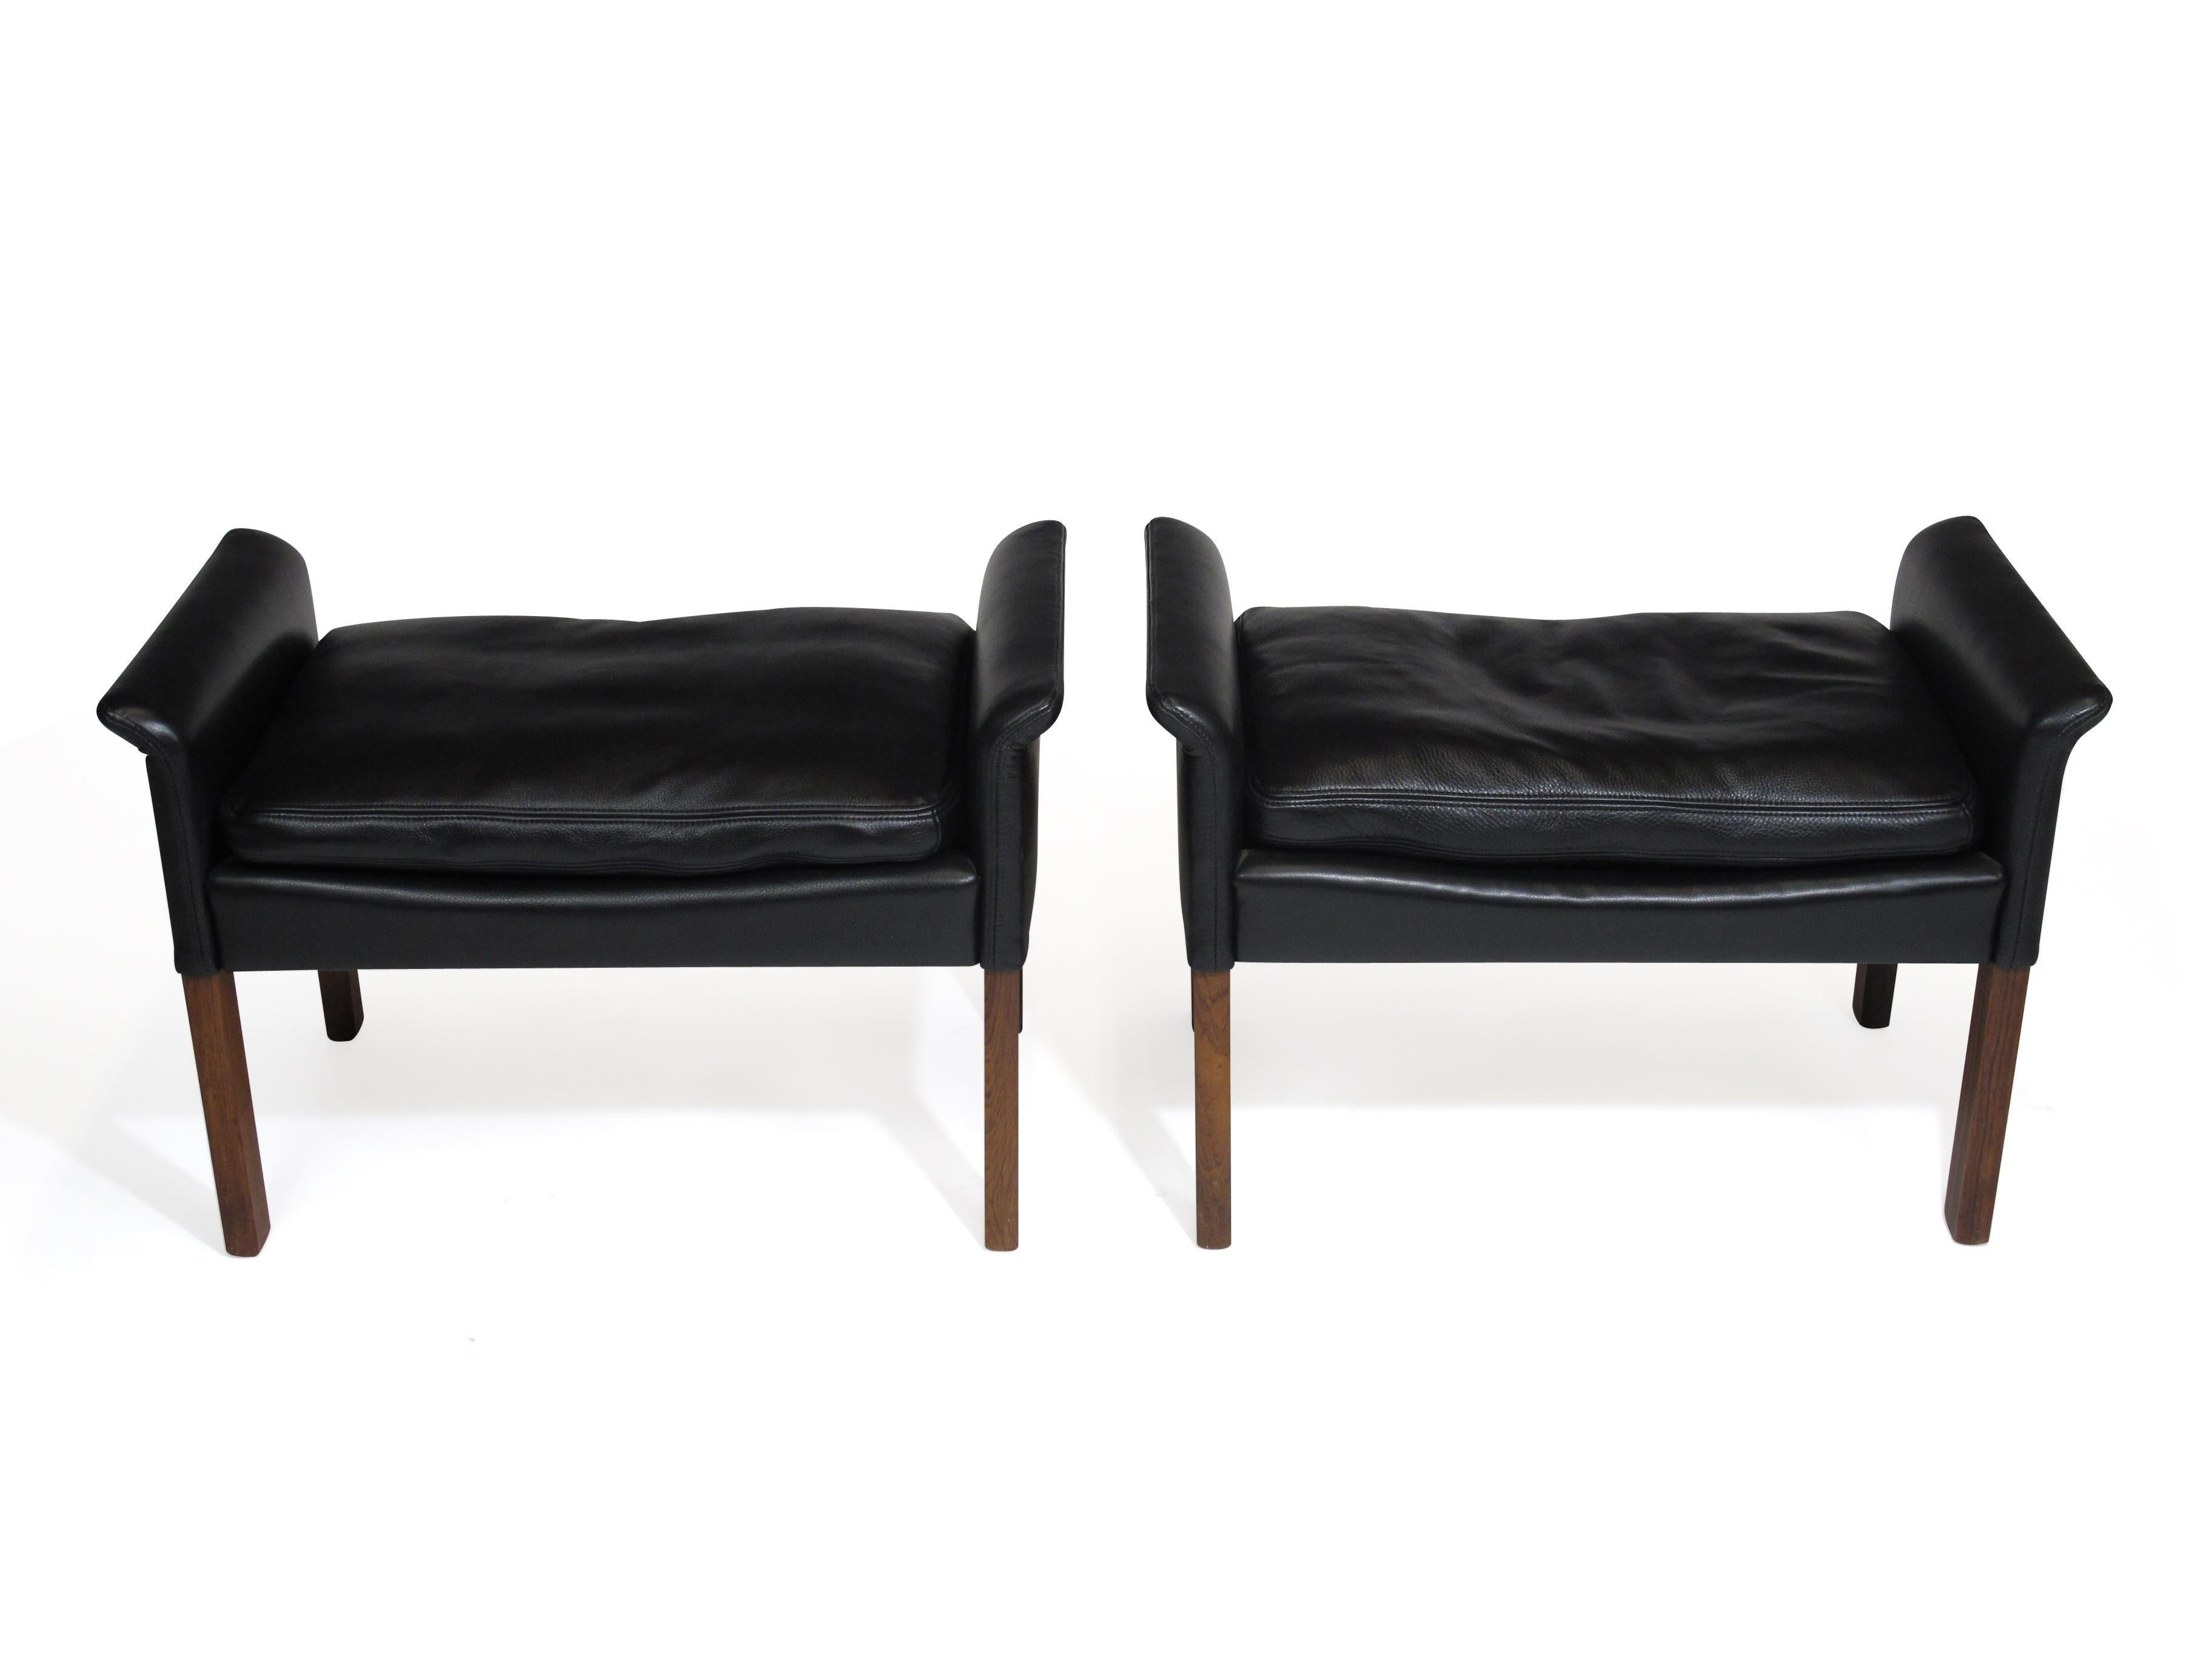 Danish Hans Olsen Rosewood and Black Leather Ottomans, A Pair